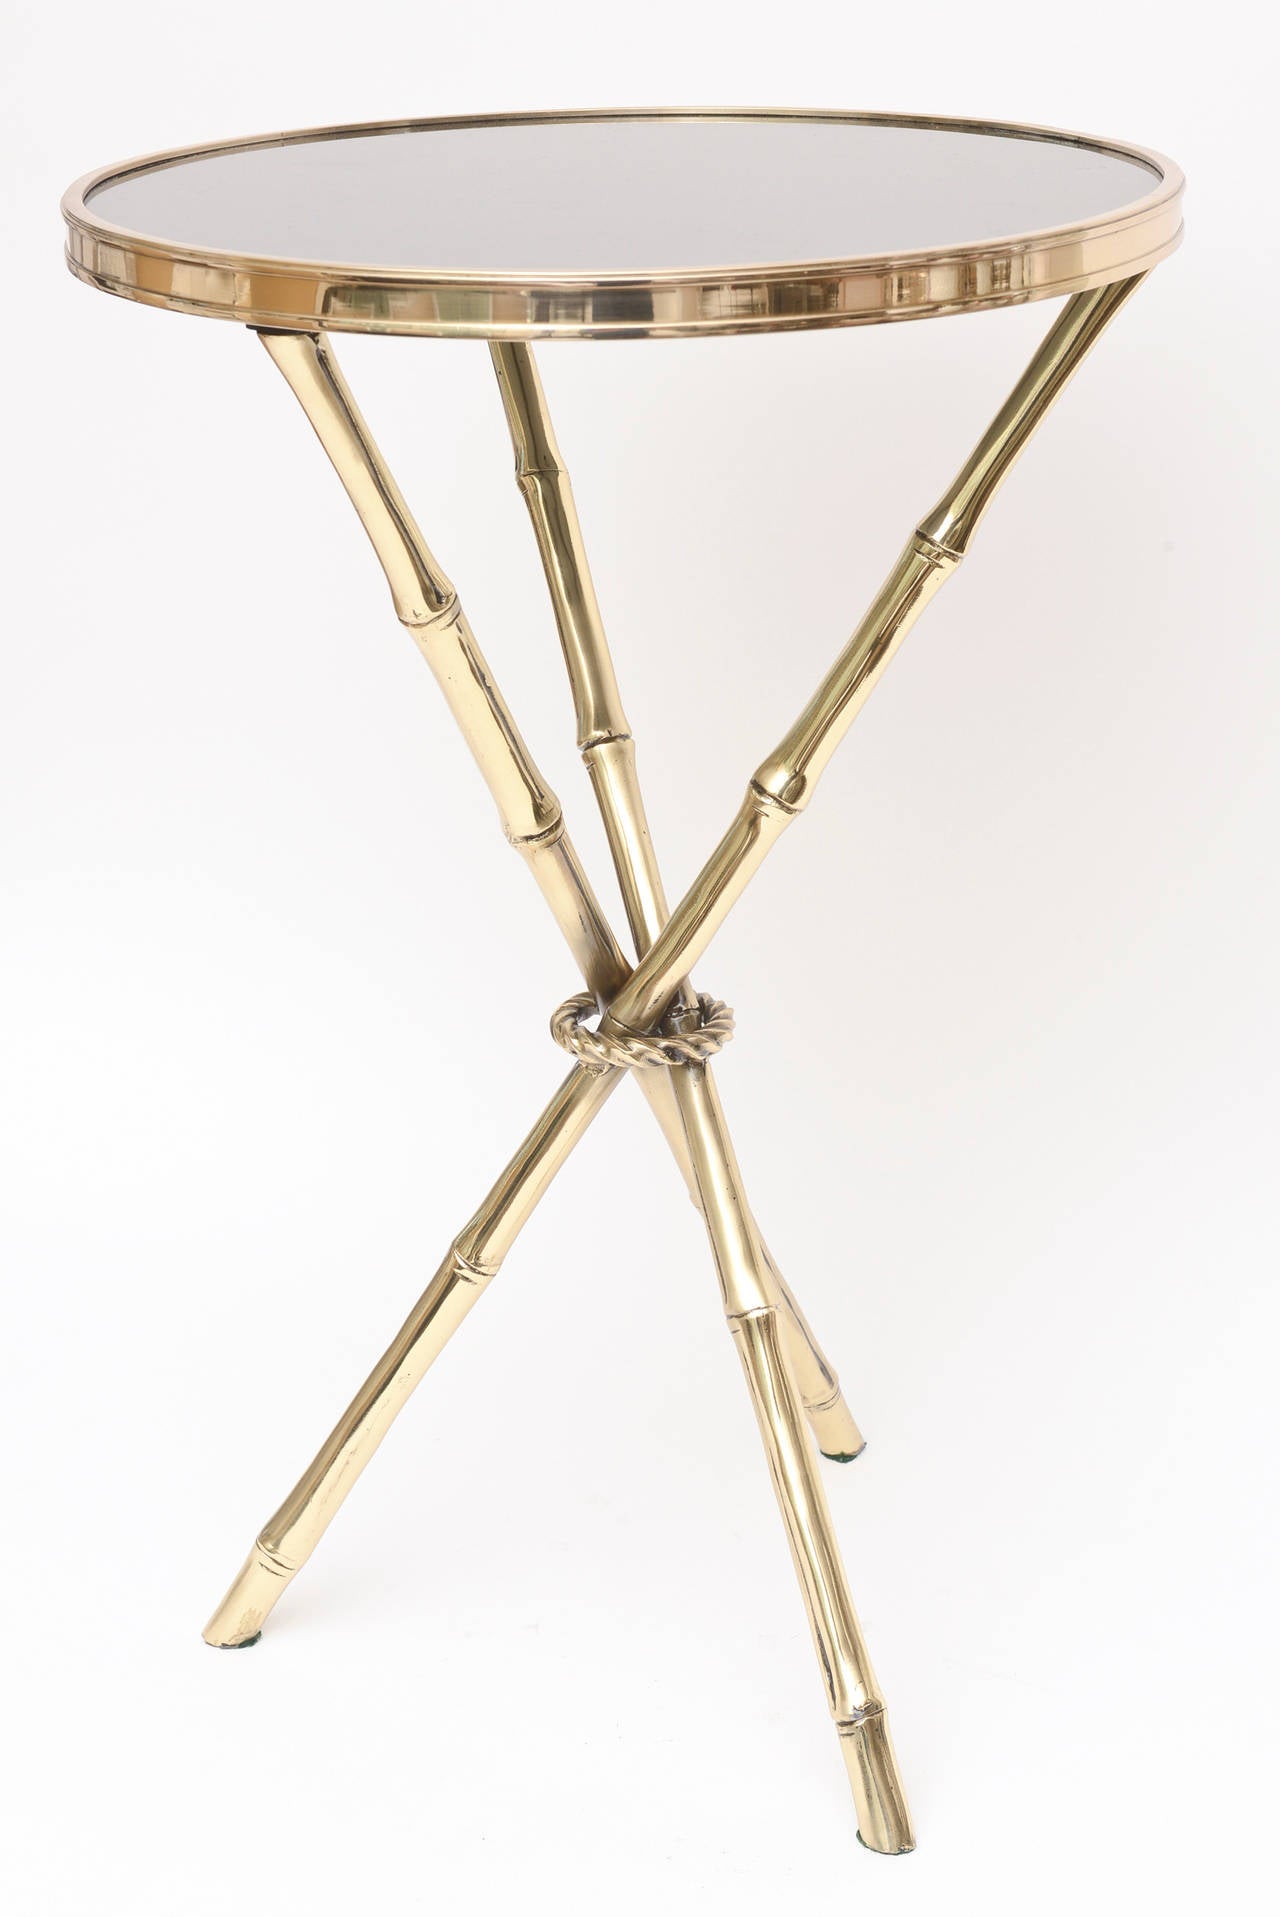 Chic Italian Polished Brass and Granite Faux Bamboo Tripod Side Table 4